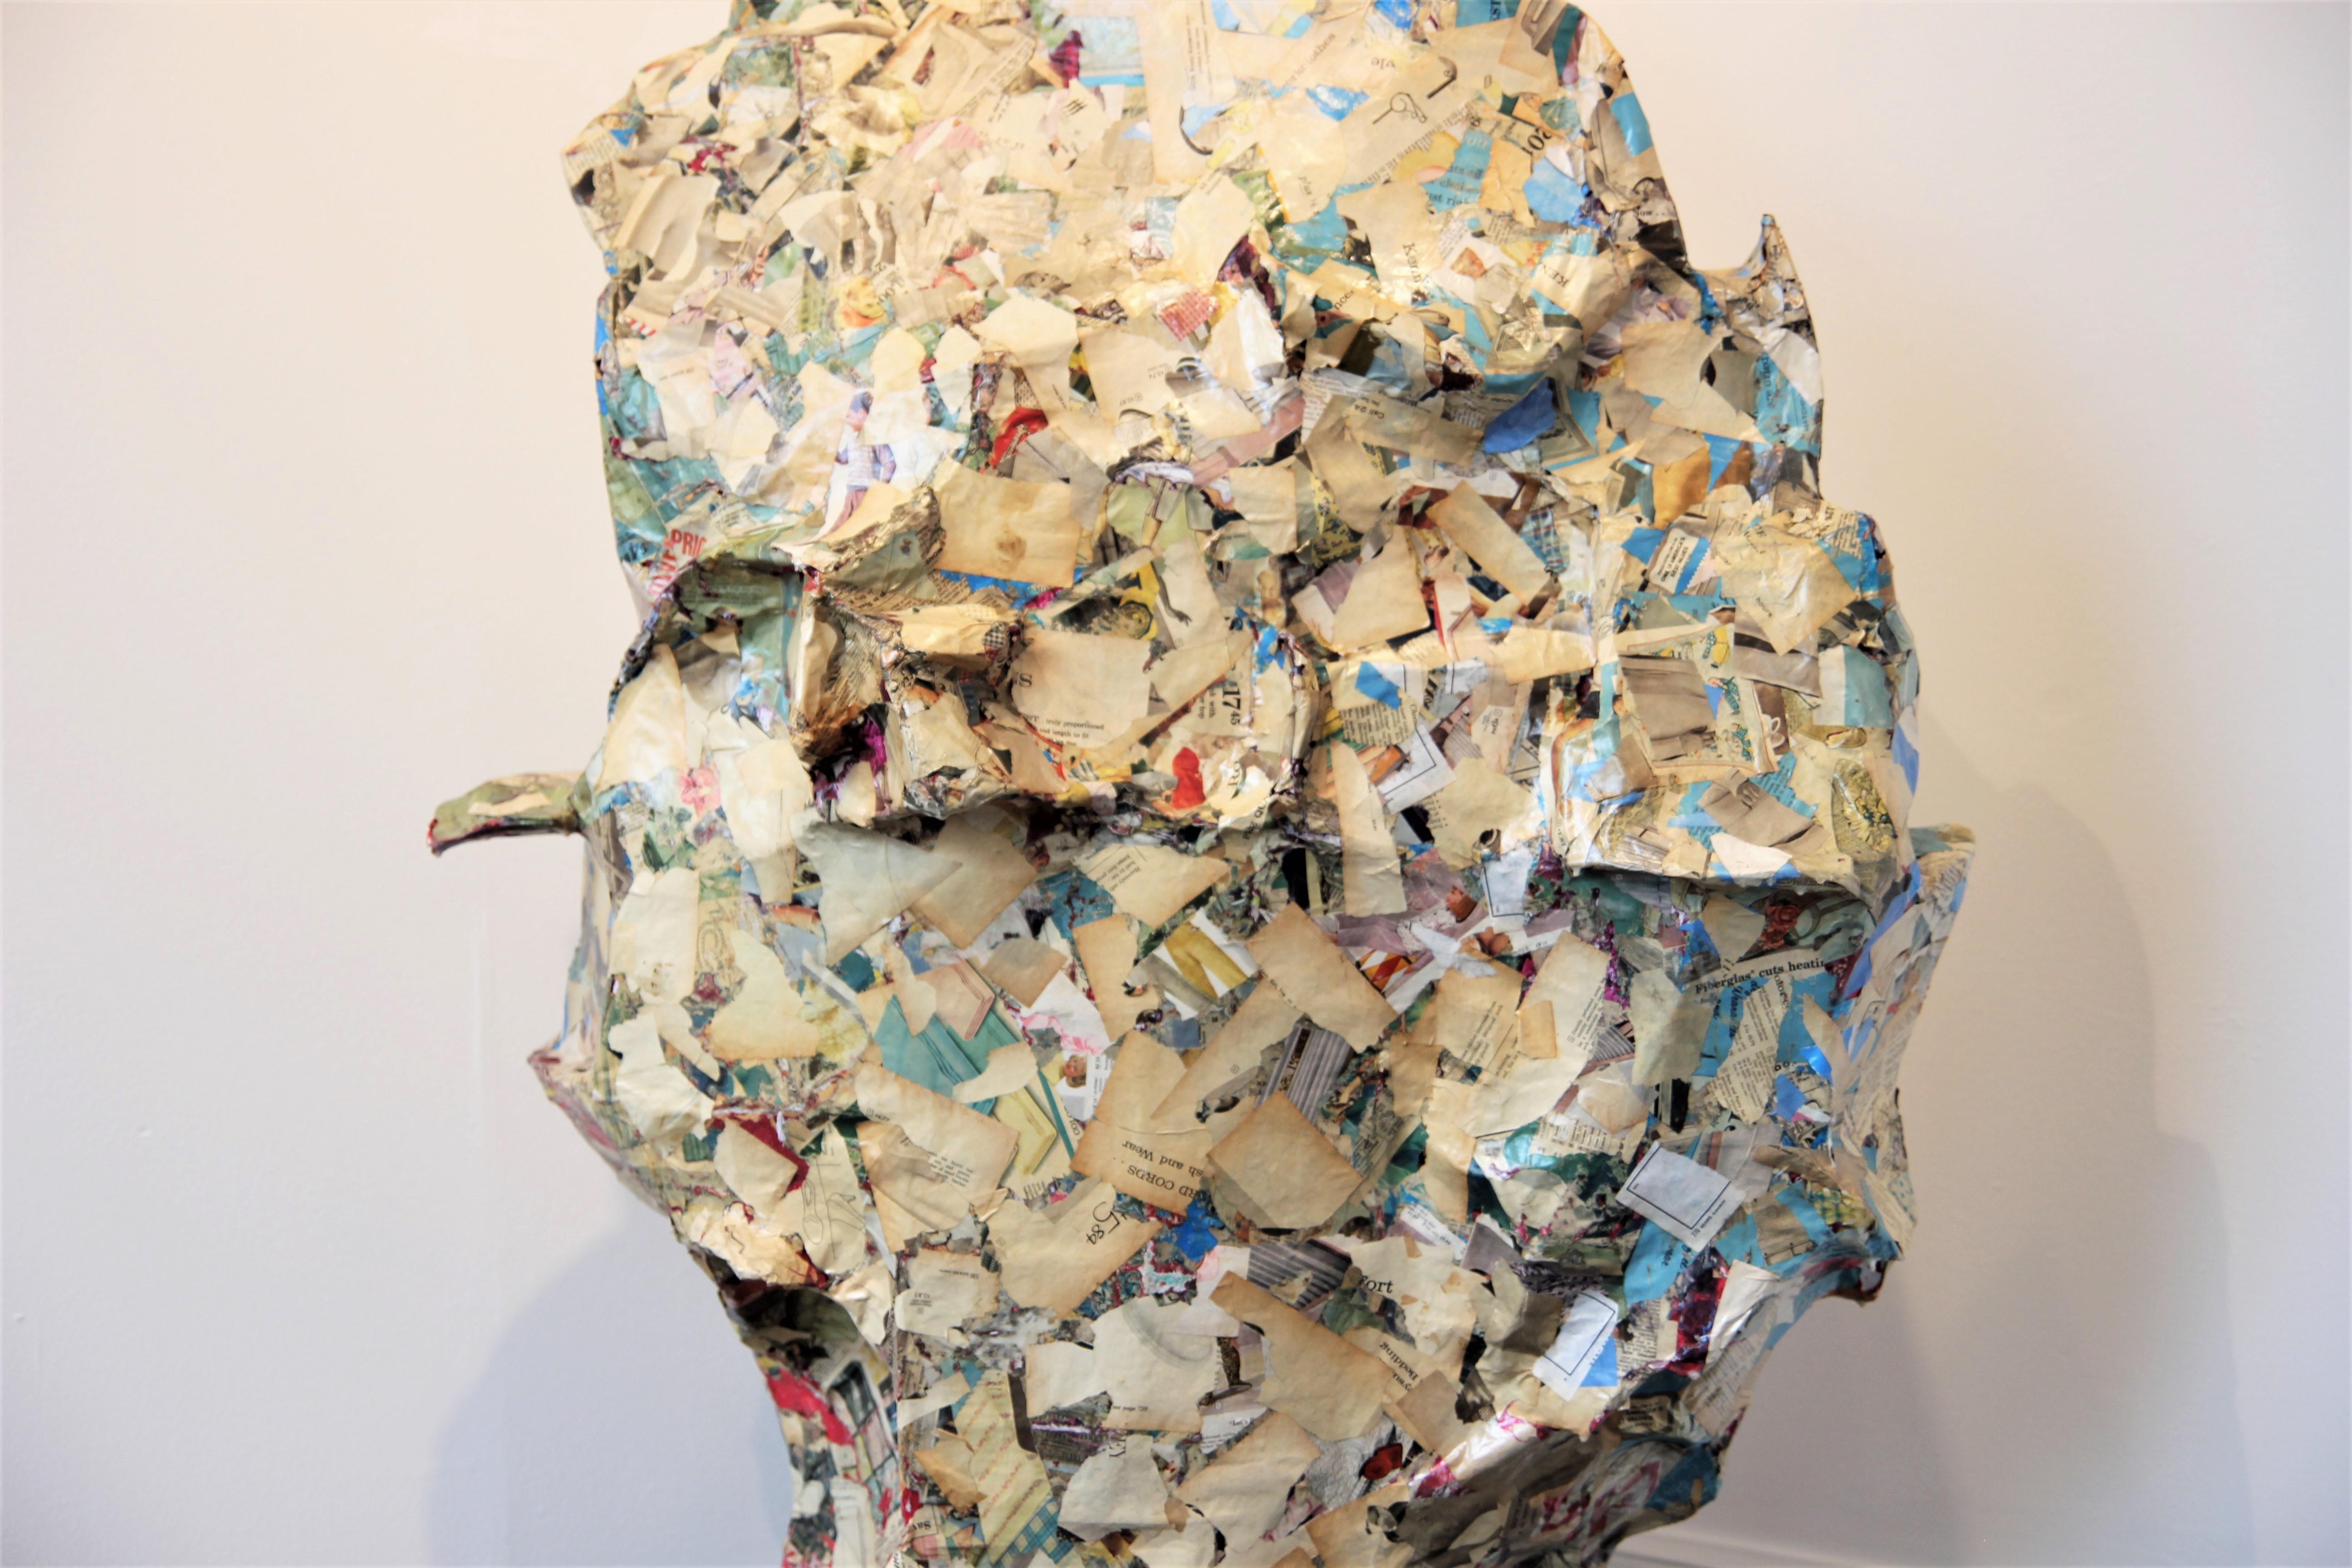 Colorful abstract contemporary collage sculpture that incorporates pages from 1960 Sears catalogues, cardboard, wood, concrete, acrylic paint, and wood glue. The organic, amorphous form features a primarily cream surface with accents of bright blues